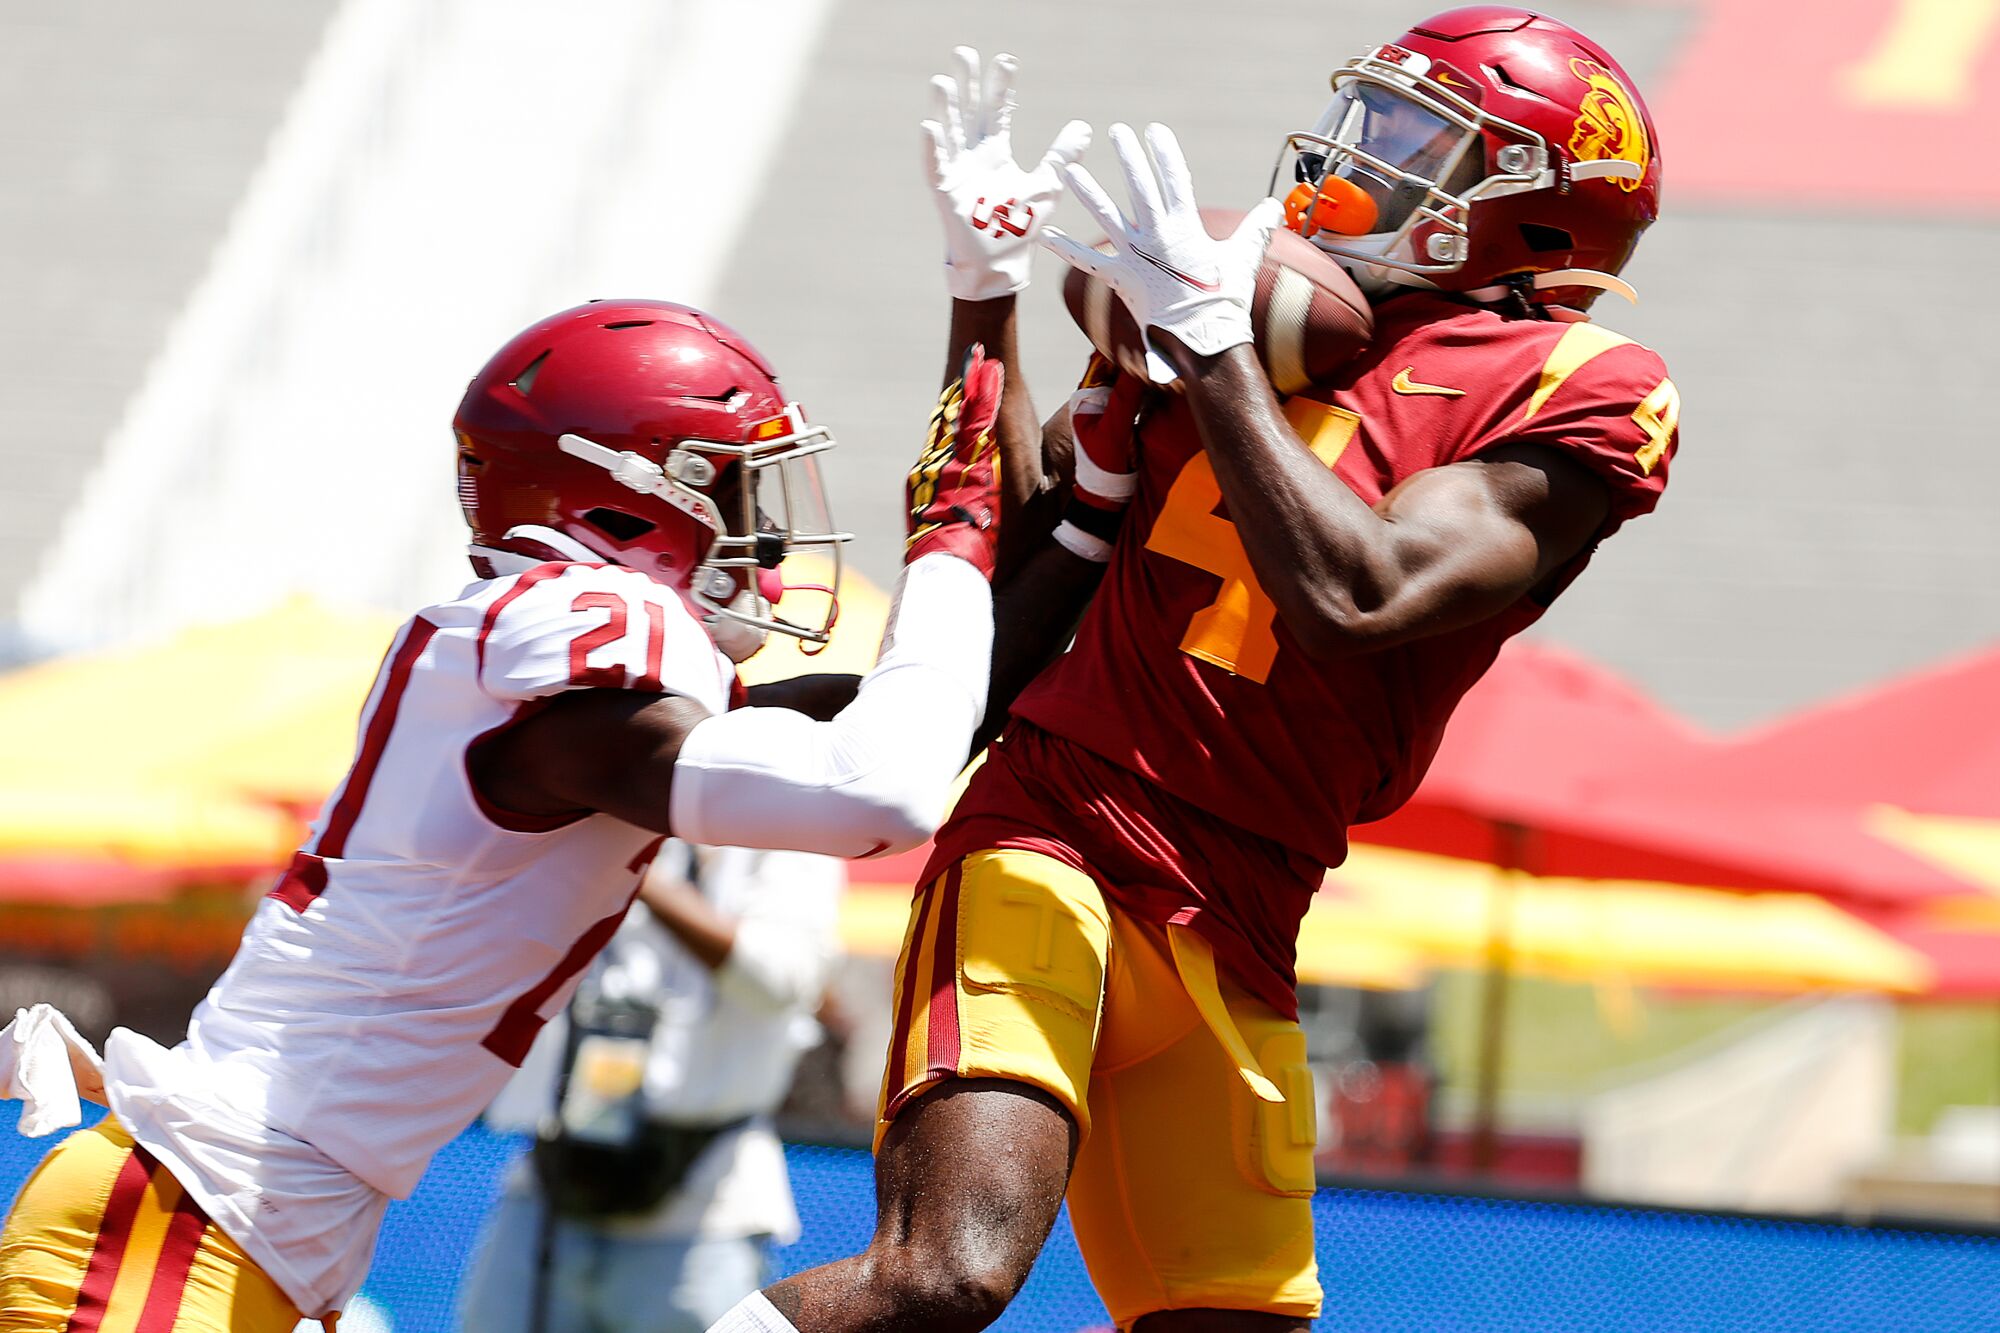 Mario Williams catches a touchdown pass while covered by defensive back Latrell McCutchin in the USC Spring Game on Saturday.